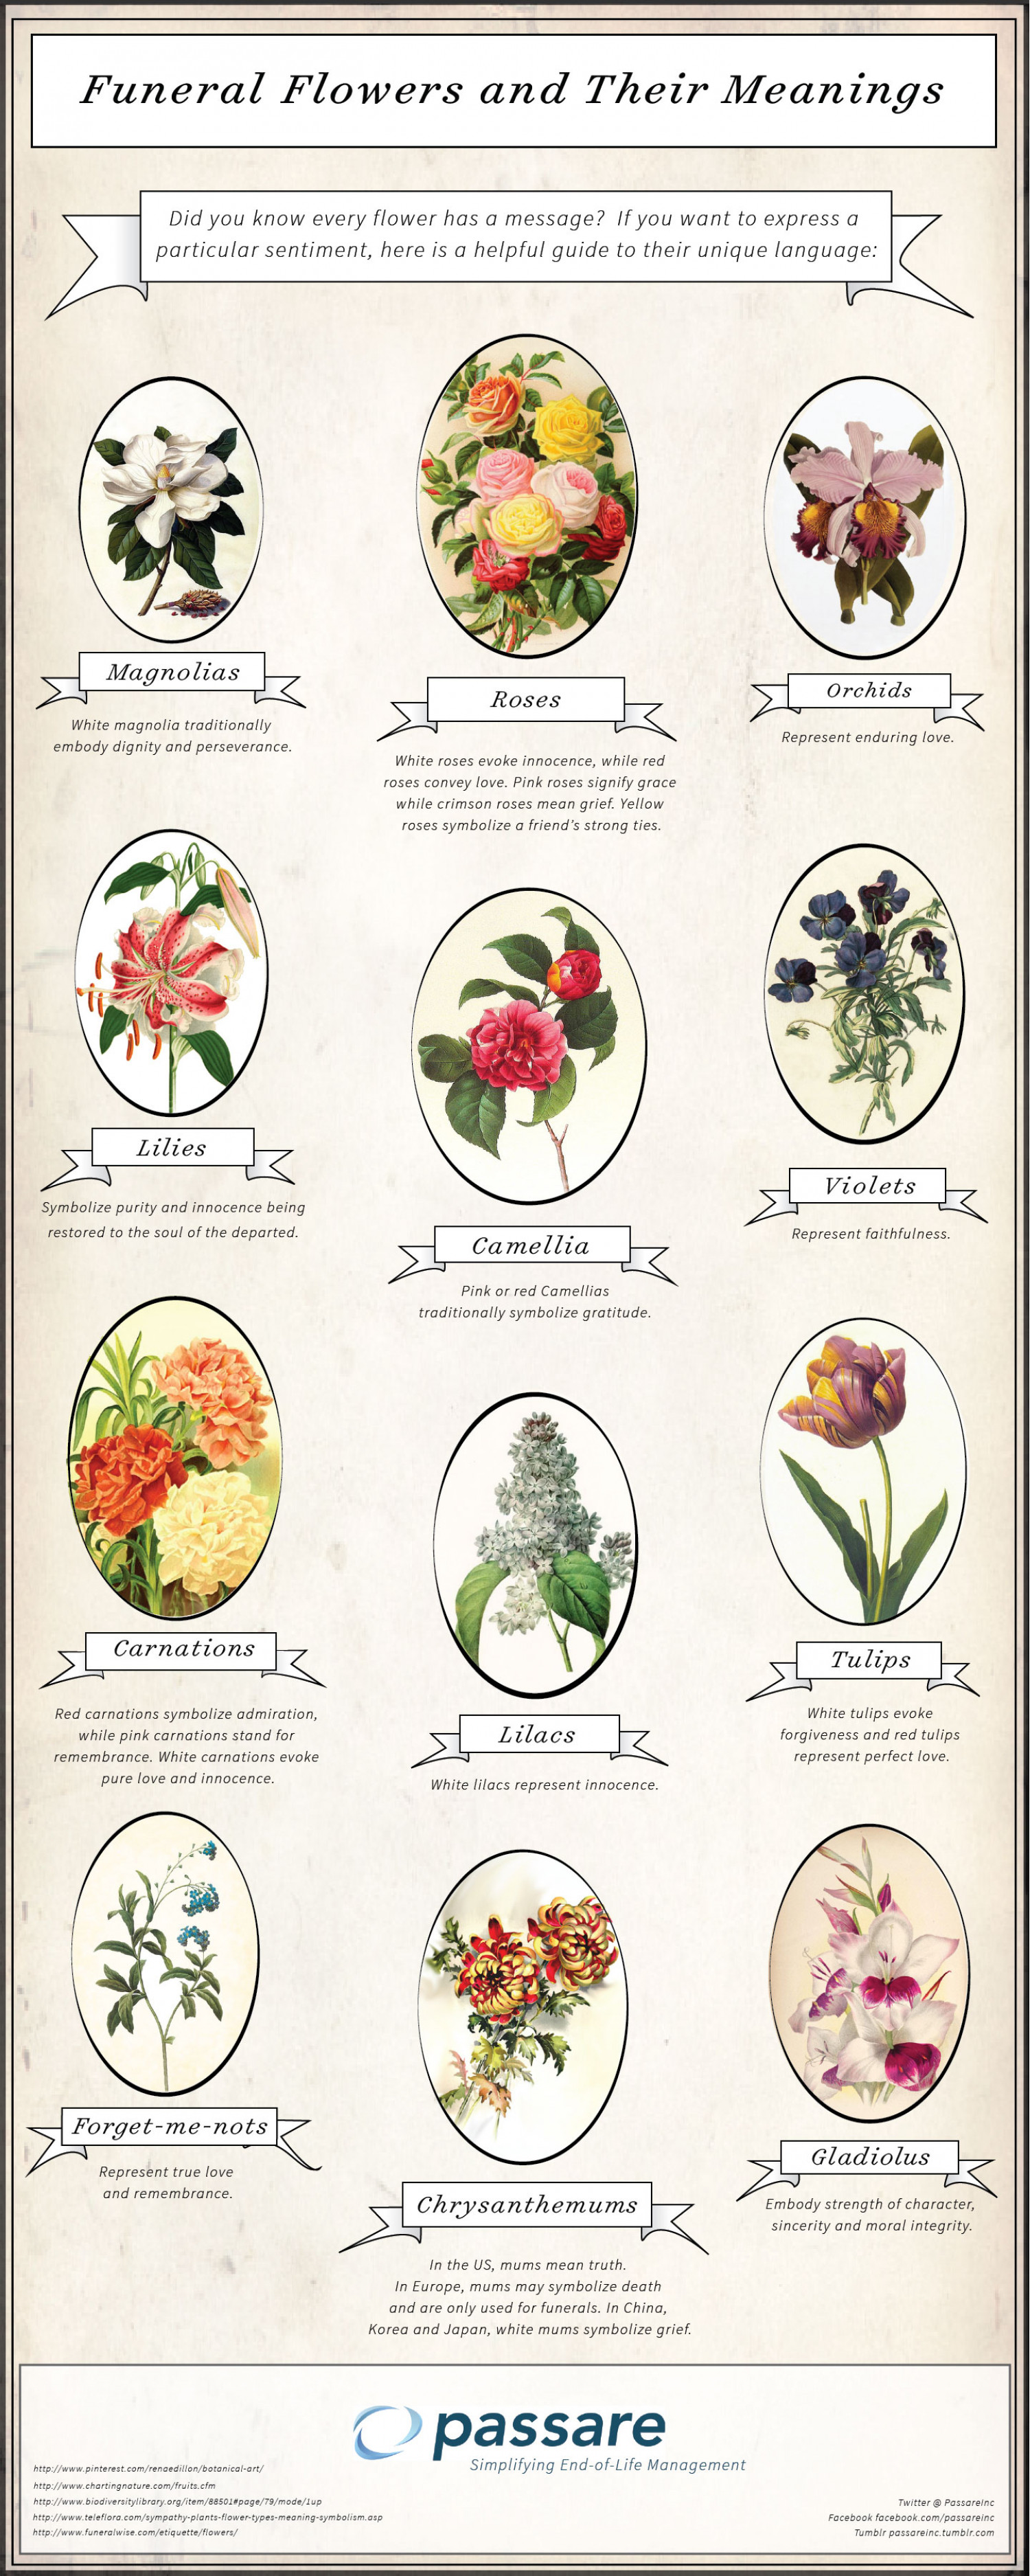 Funeral Flowers and Their Meanings